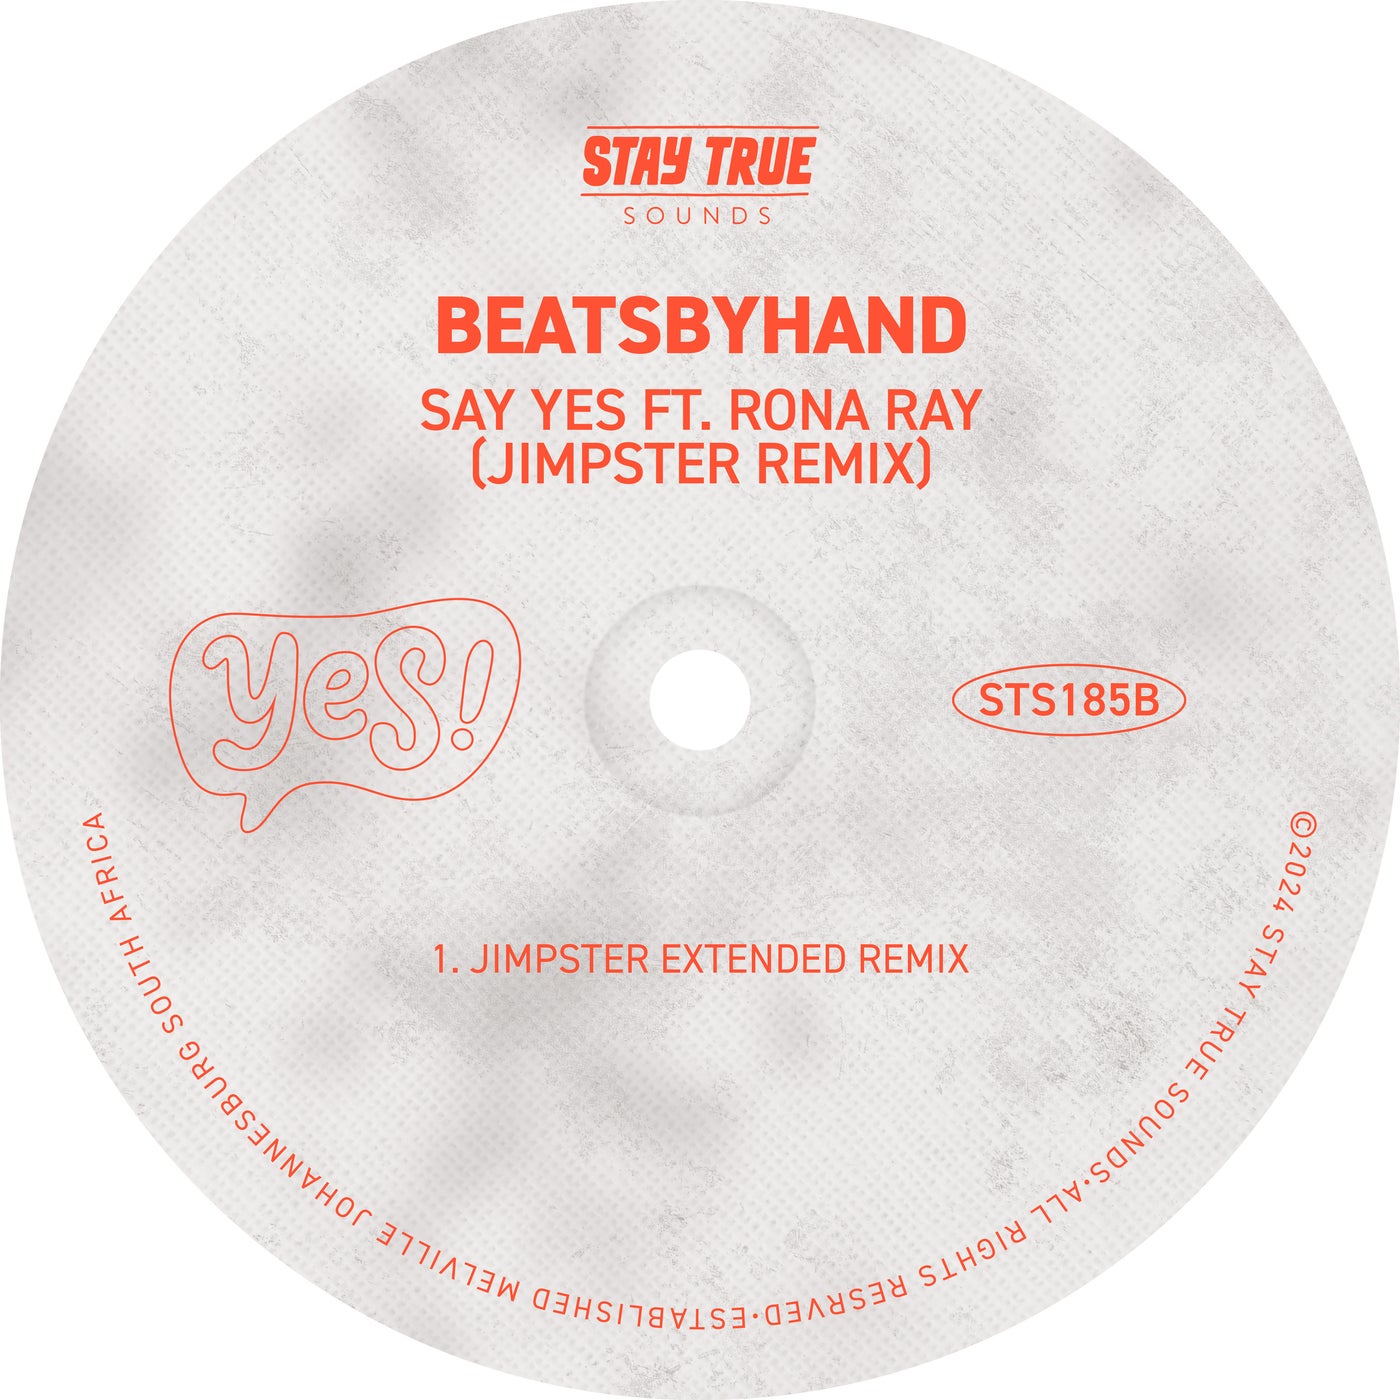 image cover: Rona Ray & beatsbyhand - Say Yes - Jimpster Extended Remix on Stay True Sounds